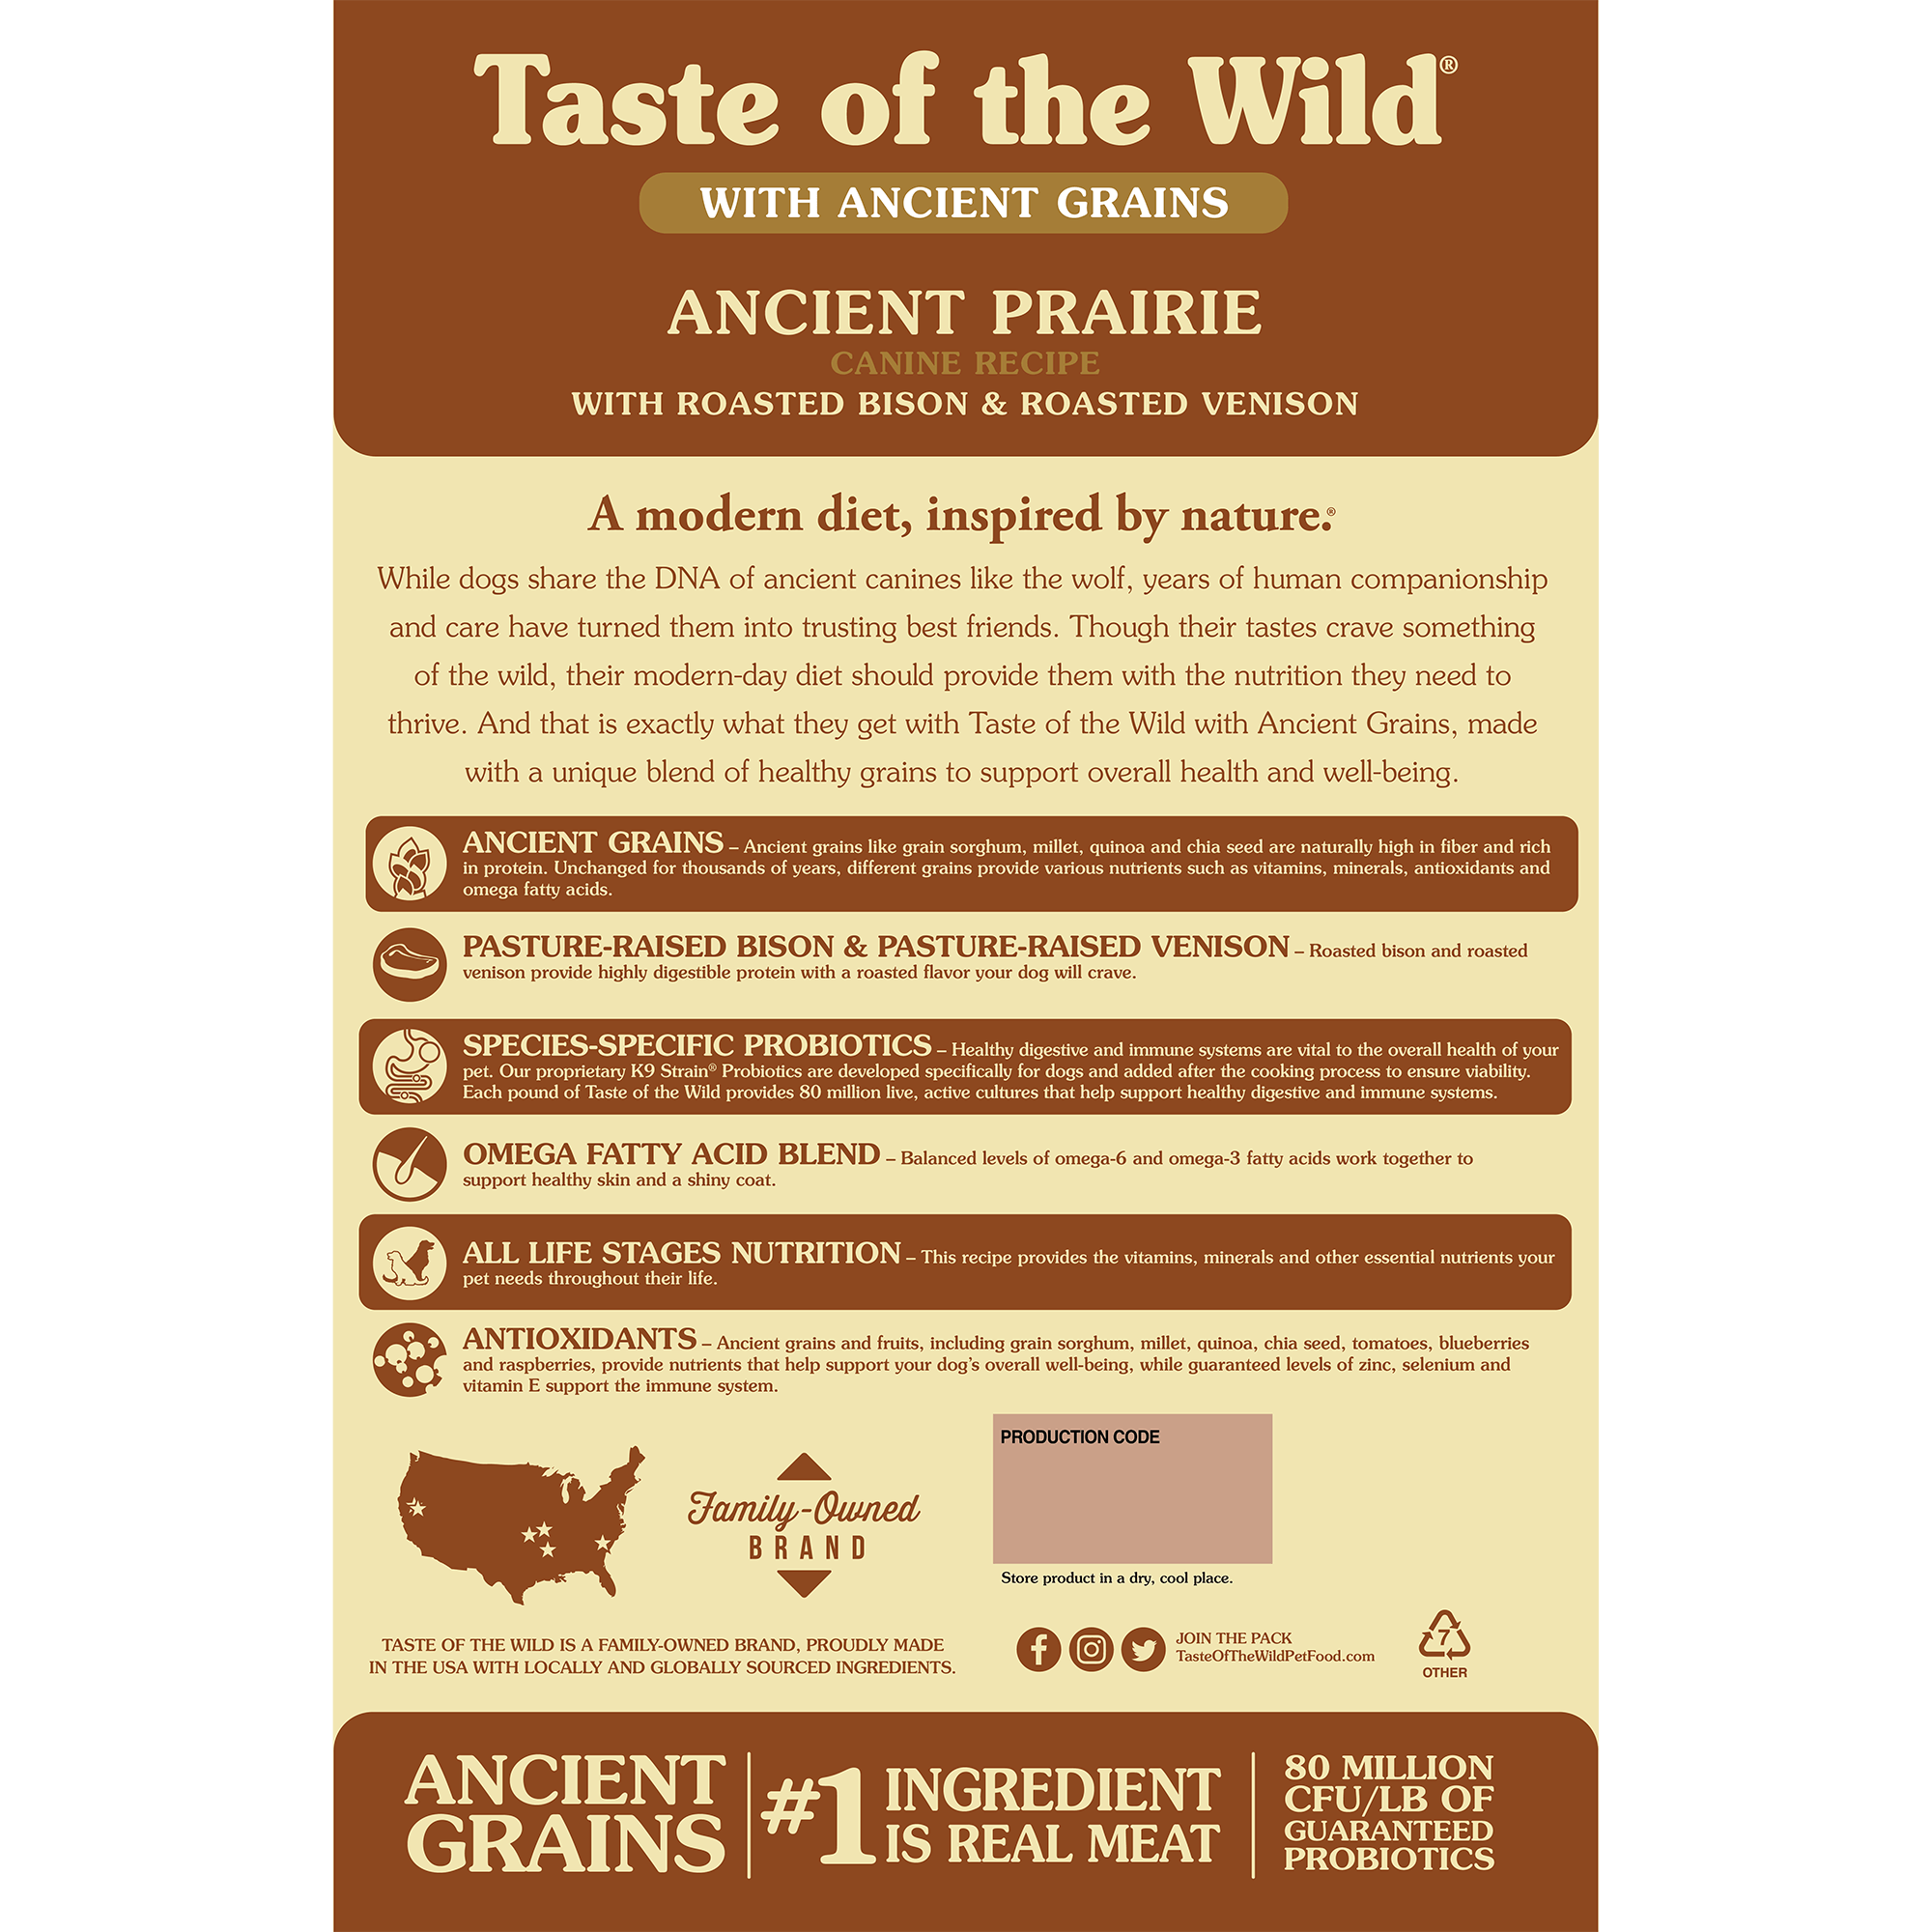 The back of a bag of Ancient Prairie Canine Recipe with Roasted Bison & Roasted Venison.